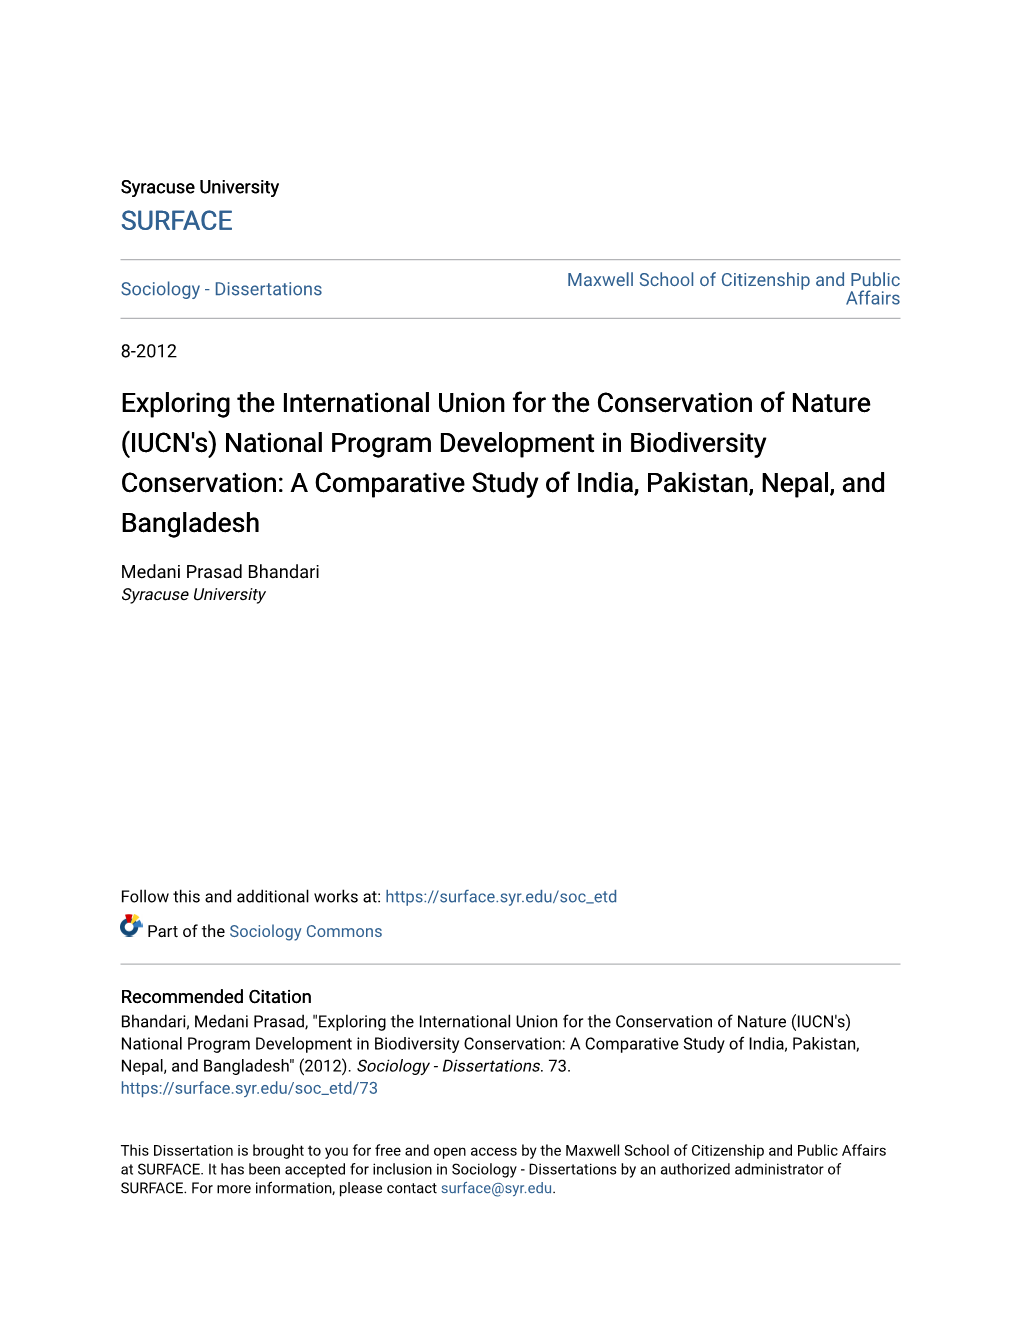 IUCN's) National Program Development in Biodiversity Conservation: a Comparative Study of India, Pakistan, Nepal, and Bangladesh